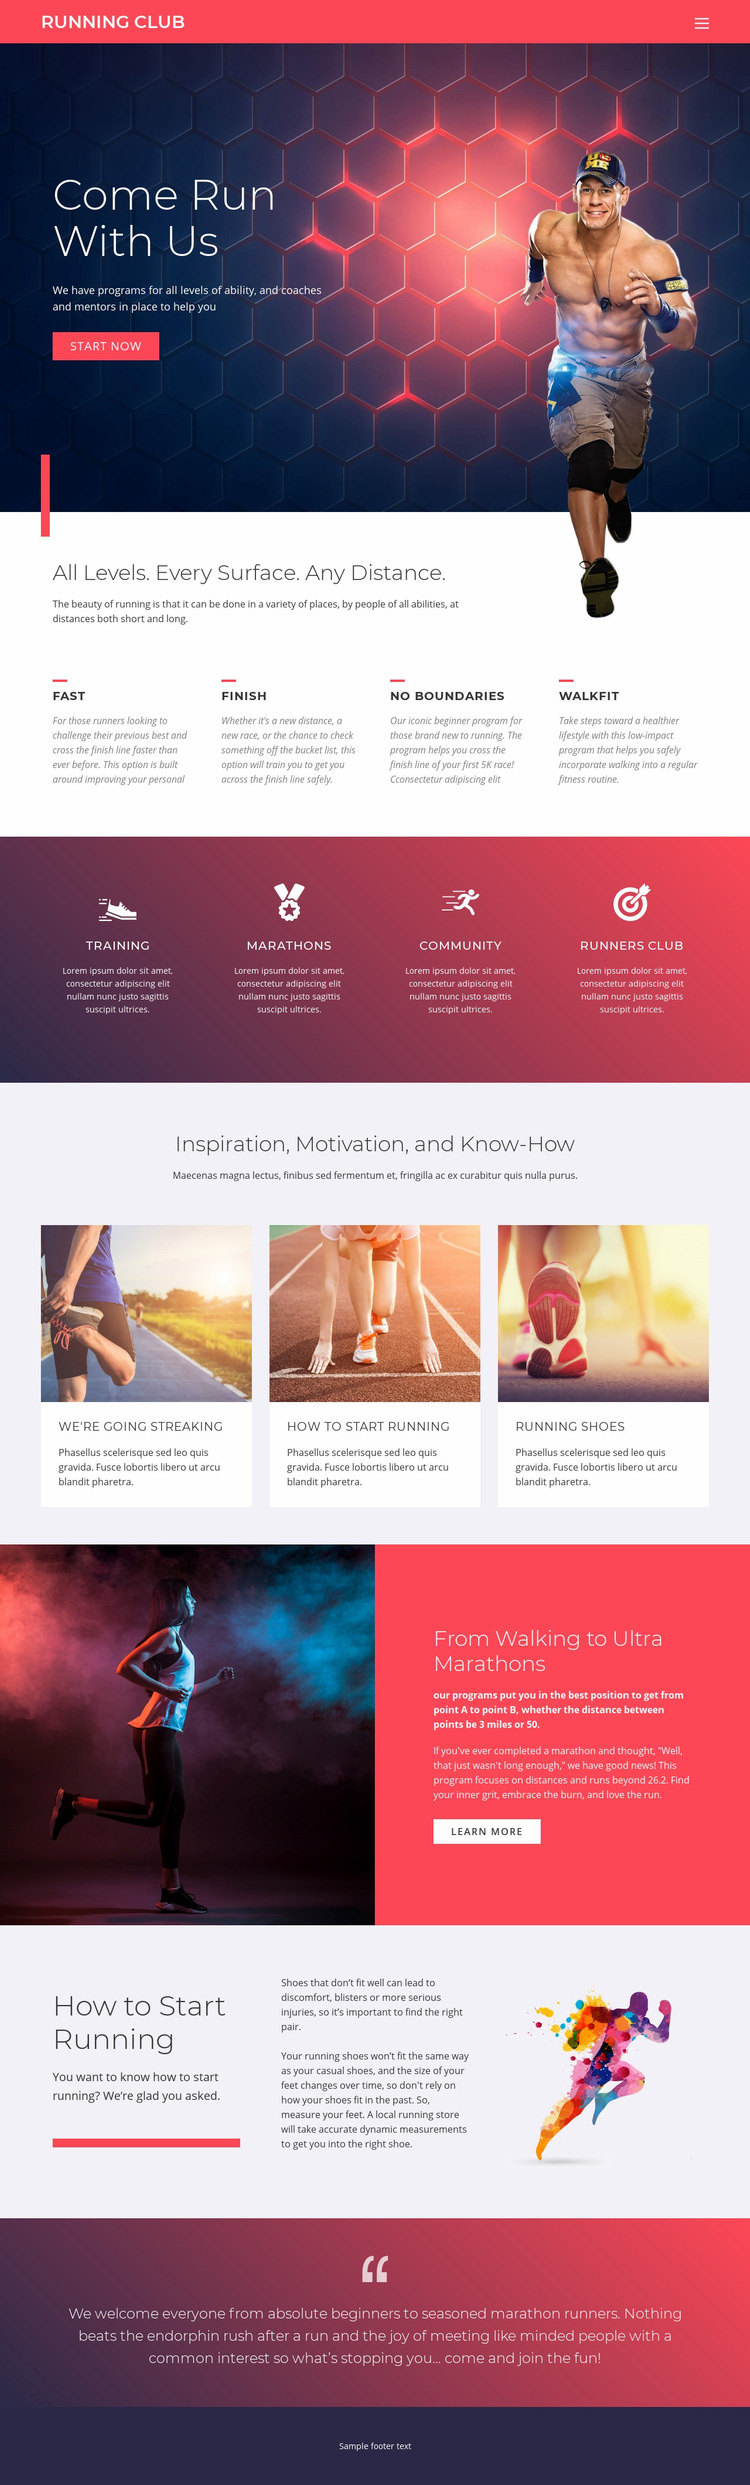 Running and sports Web Page Design